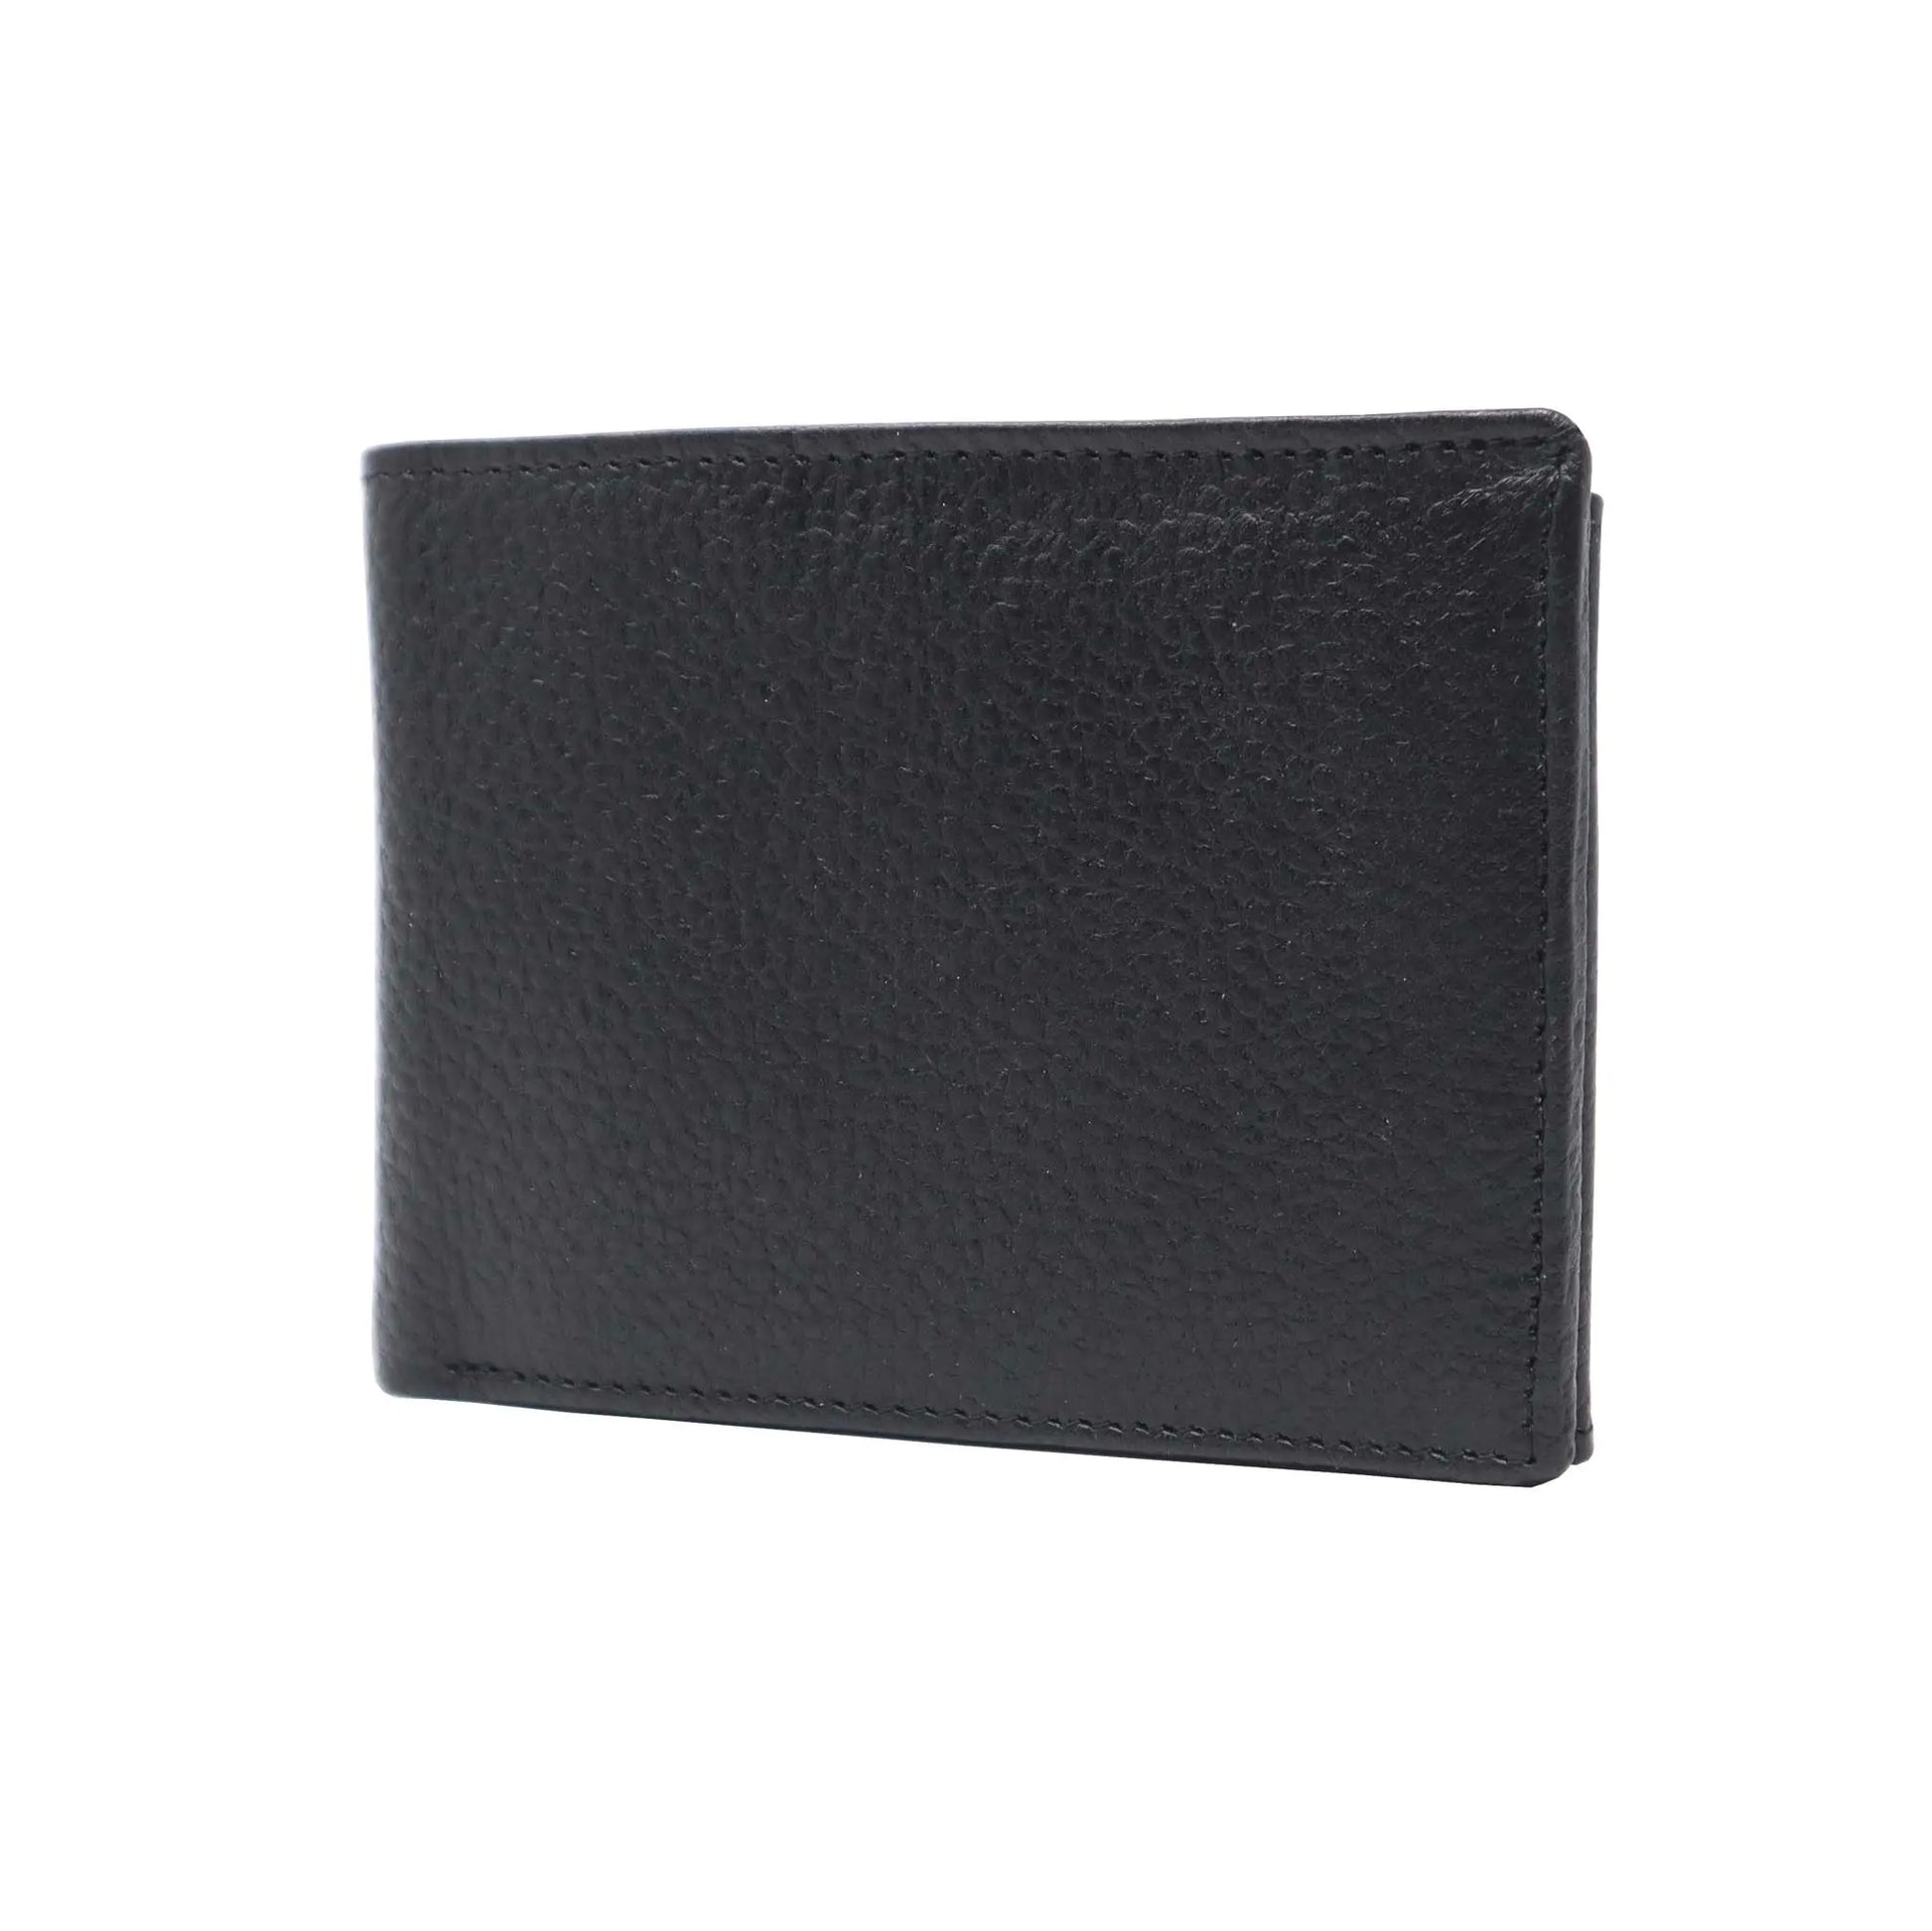 RFID Bifold Black Leather Wallet - Larimars Clothing Men's Formal and casual wear shirts